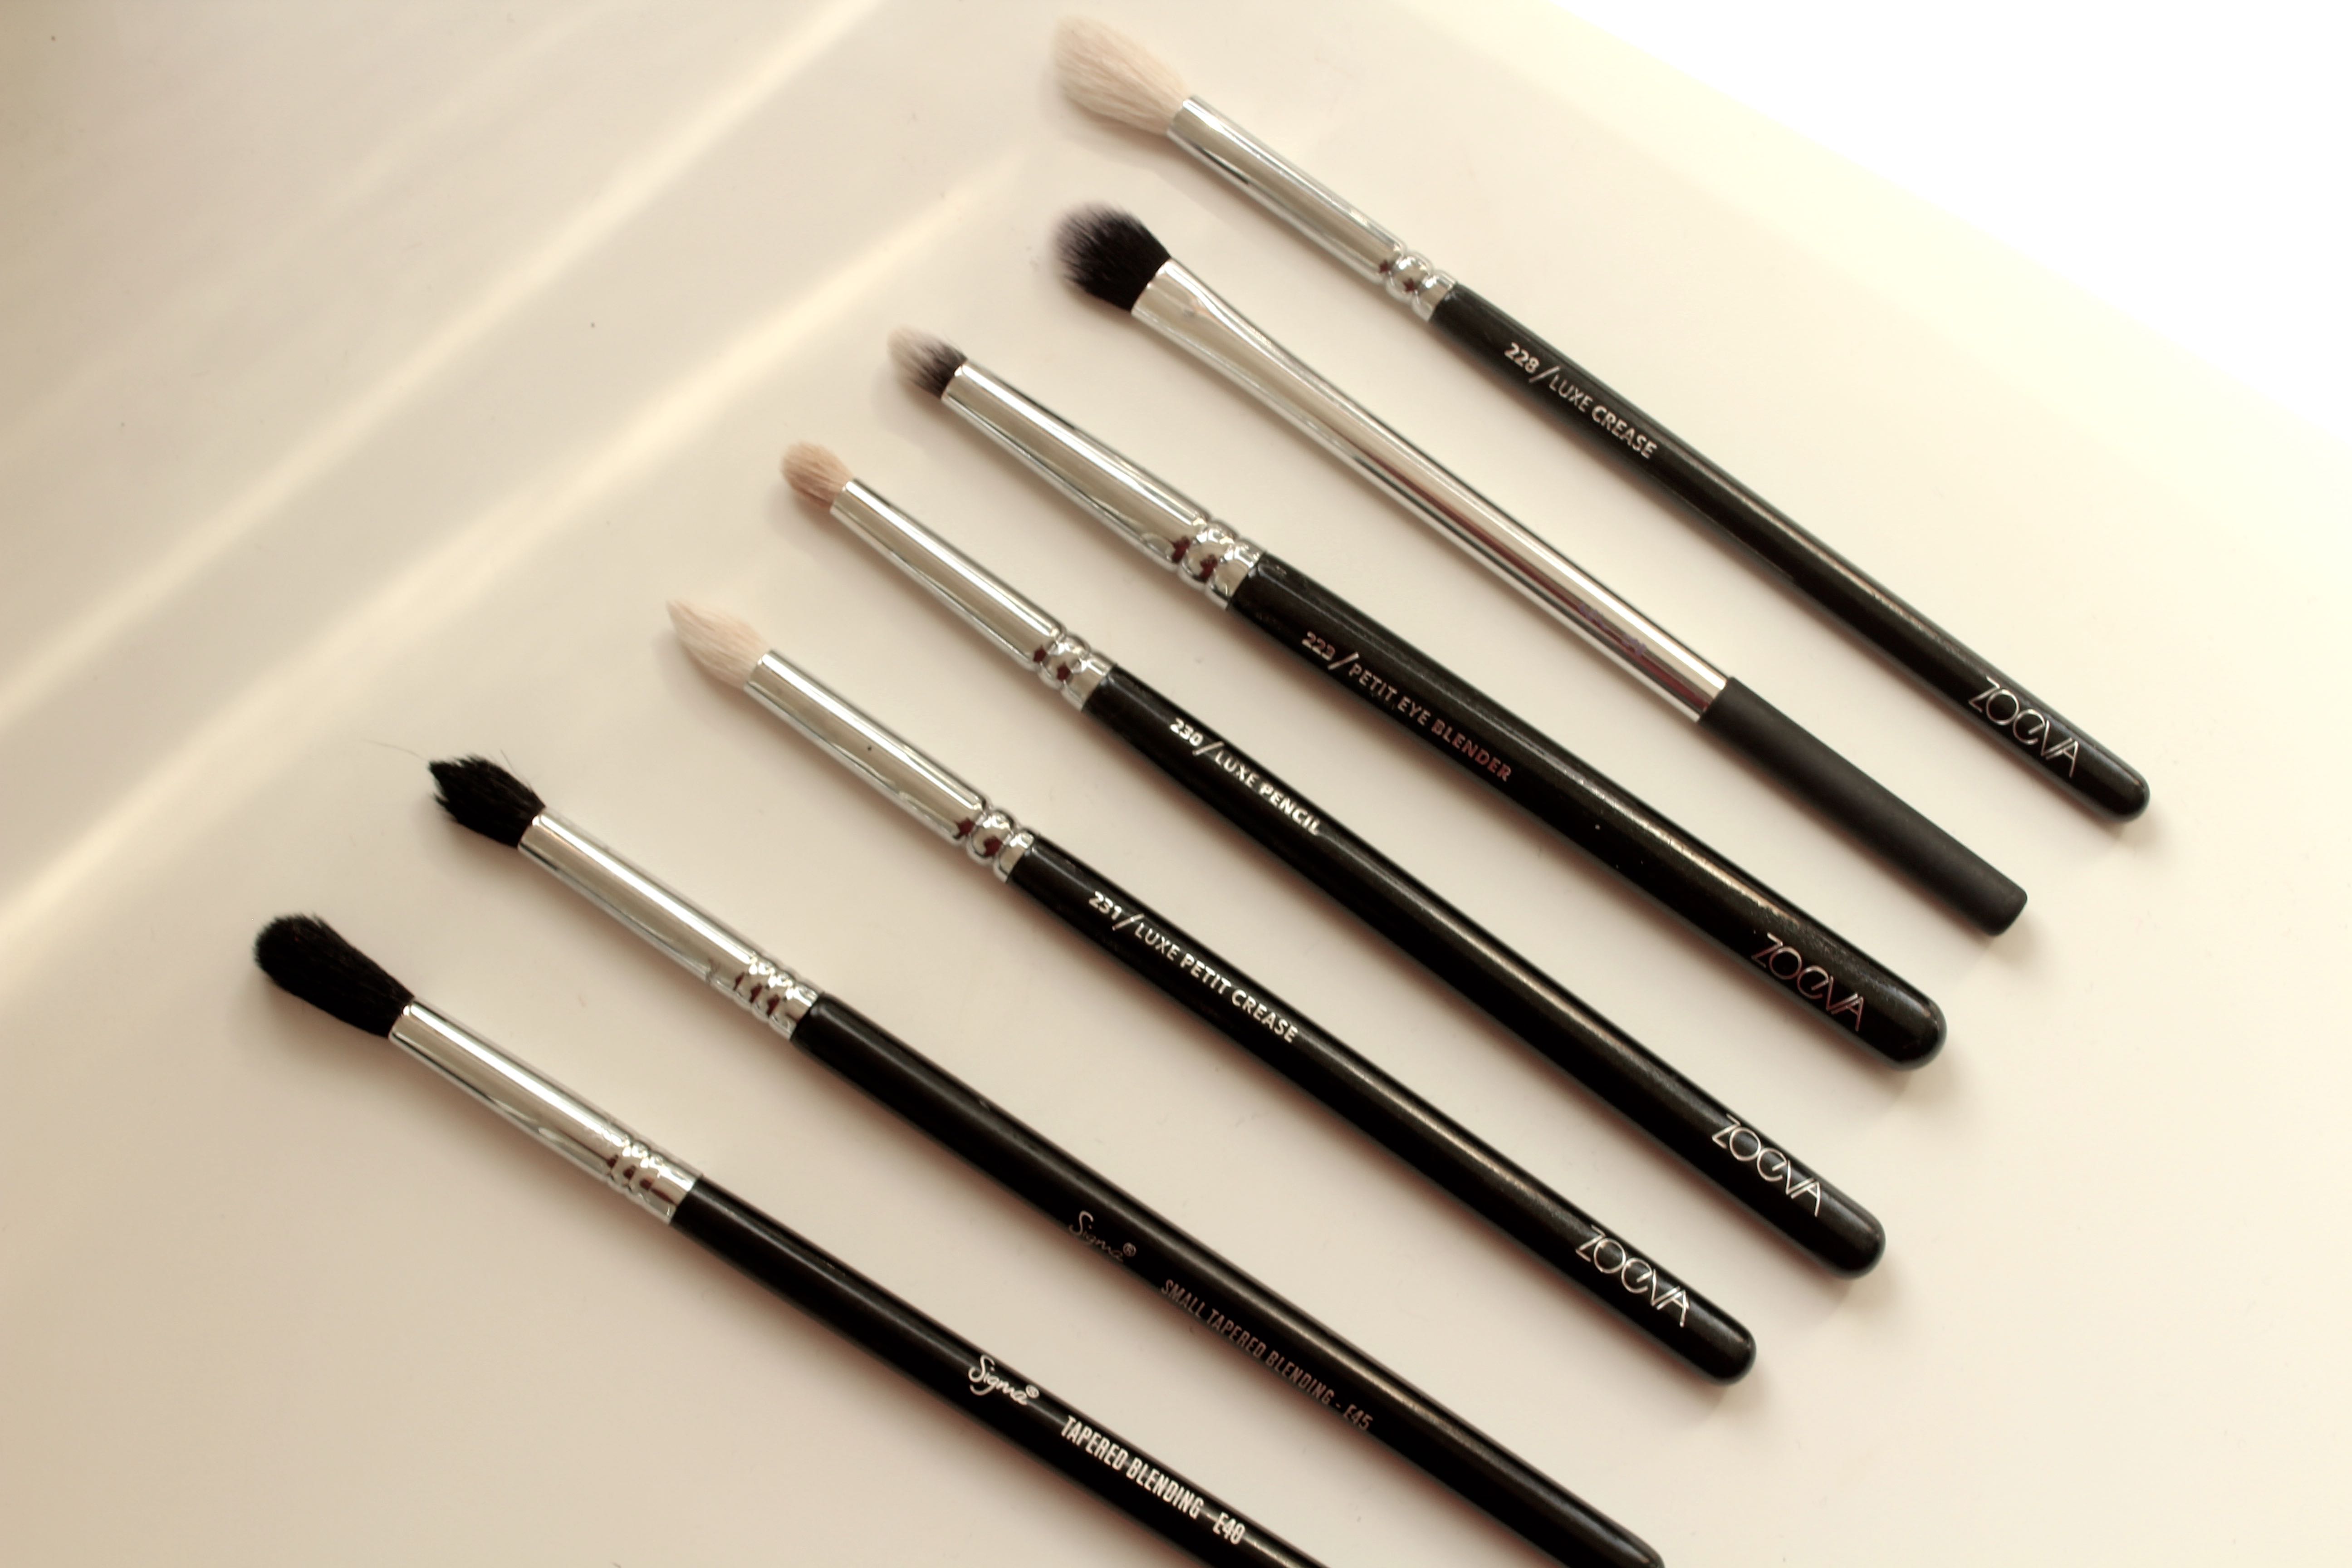 THE BEST 7 MAKEUP BRUSHES FOR SMALLER EYES (GREAT FOR ASIAN/ORIENTAL EYES) by Face Made Up